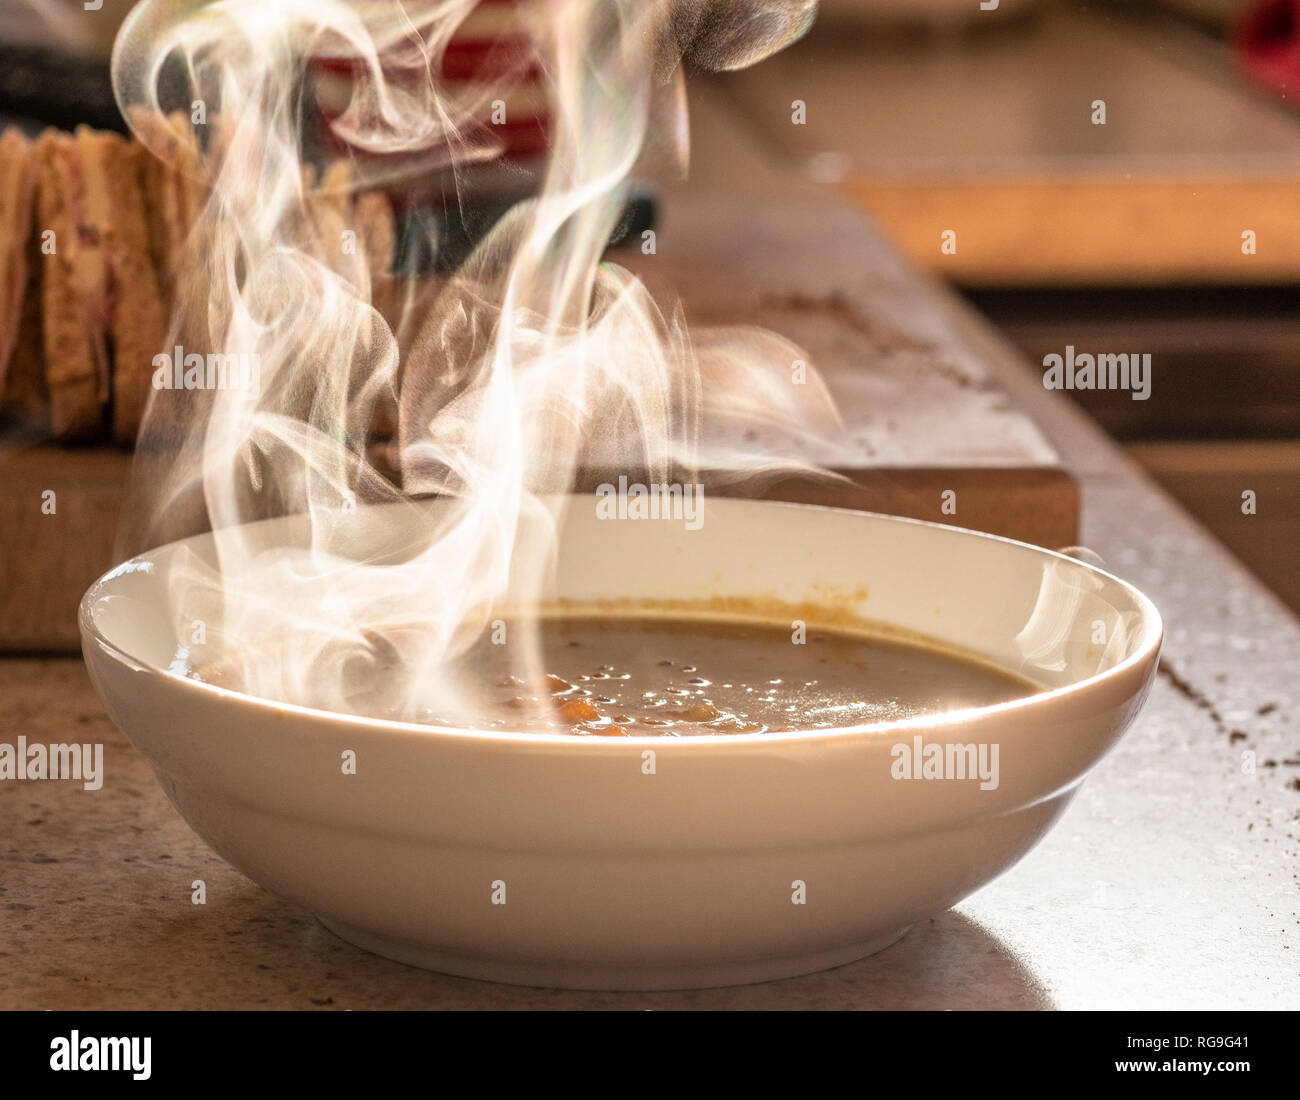 319,107 Steaming Hot Food Images, Stock Photos, 3D objects